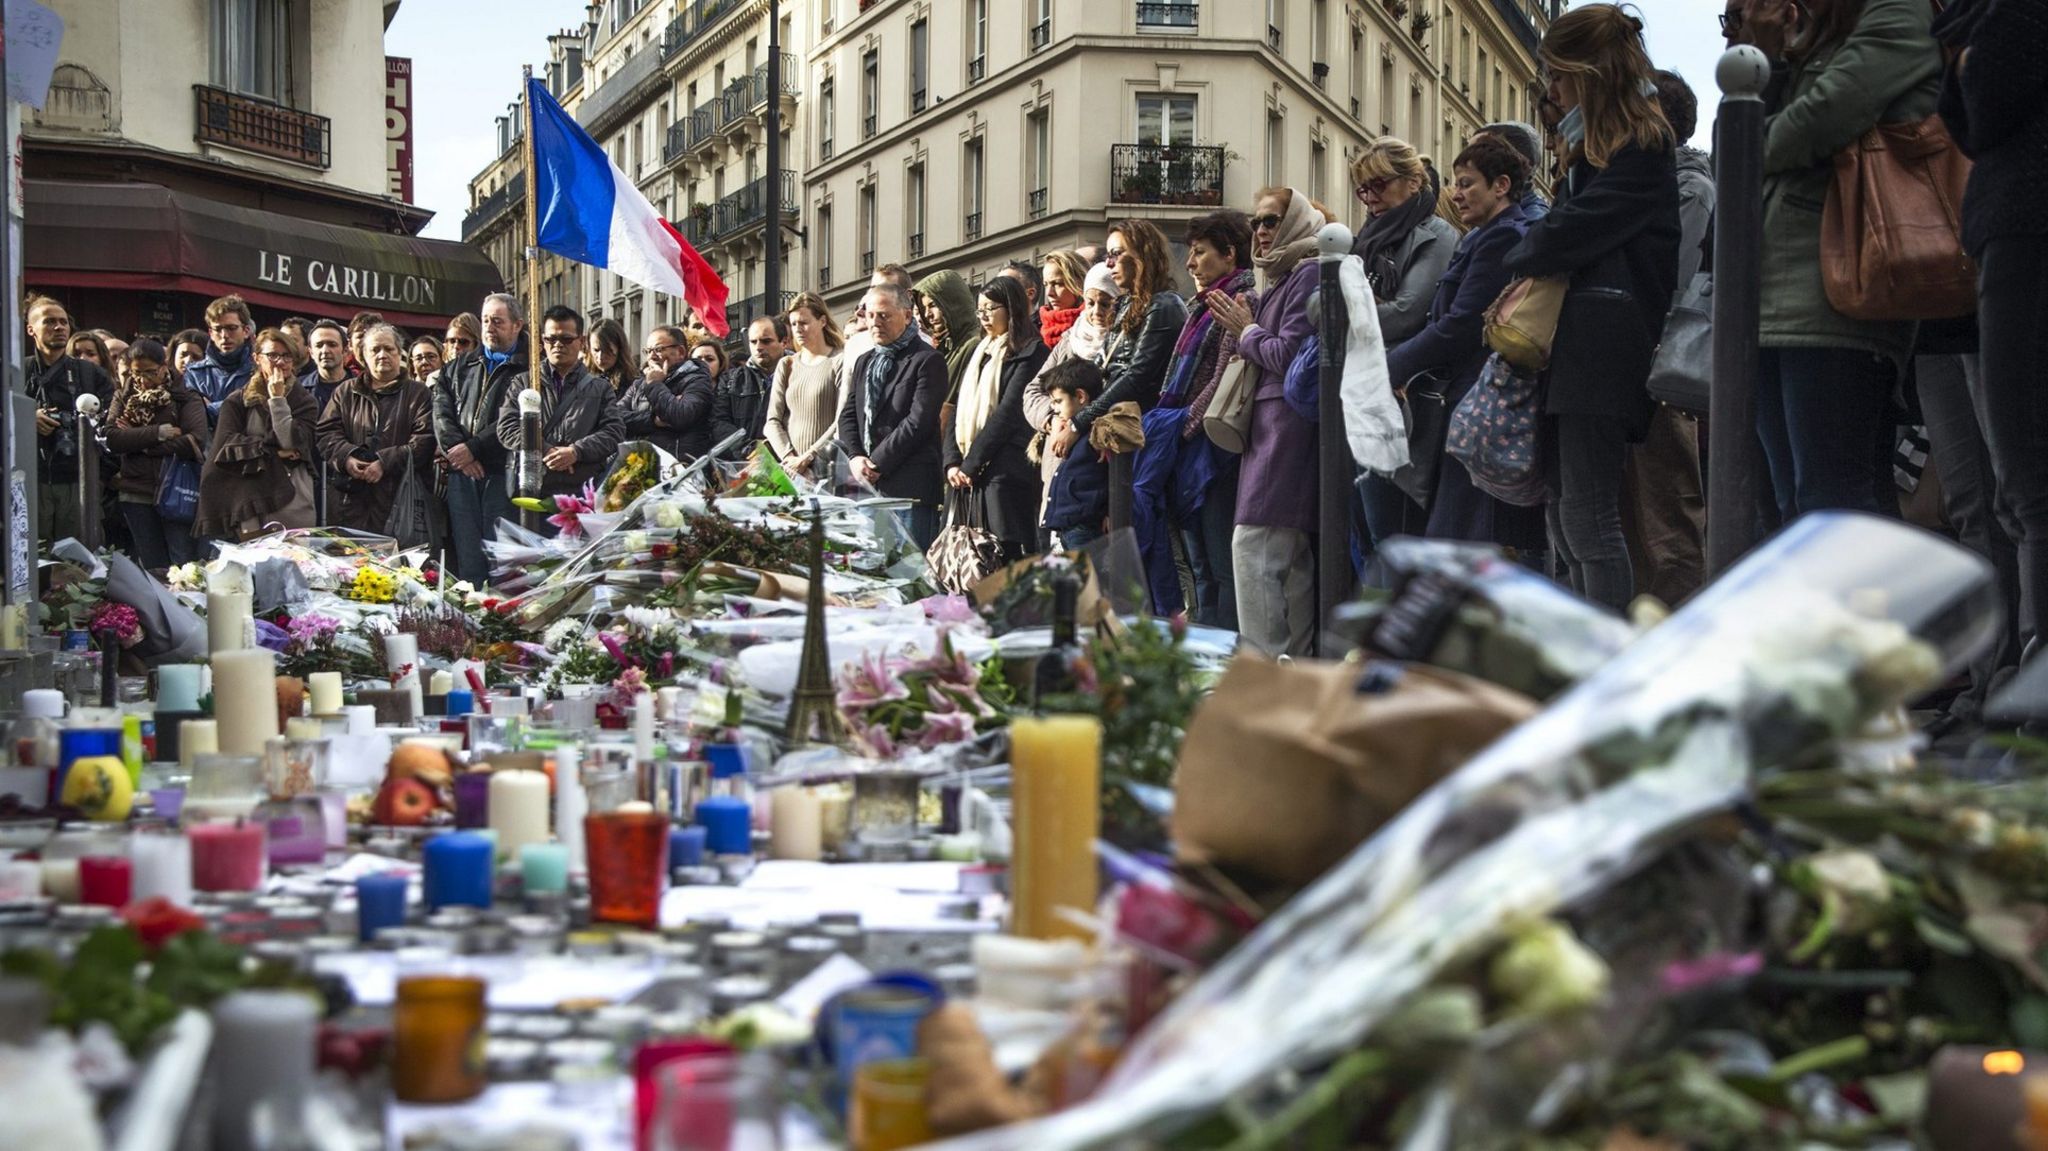 People observe a minute of silence at the Carillon and Le Petit Cambodge in Paris, (16 November 2015)